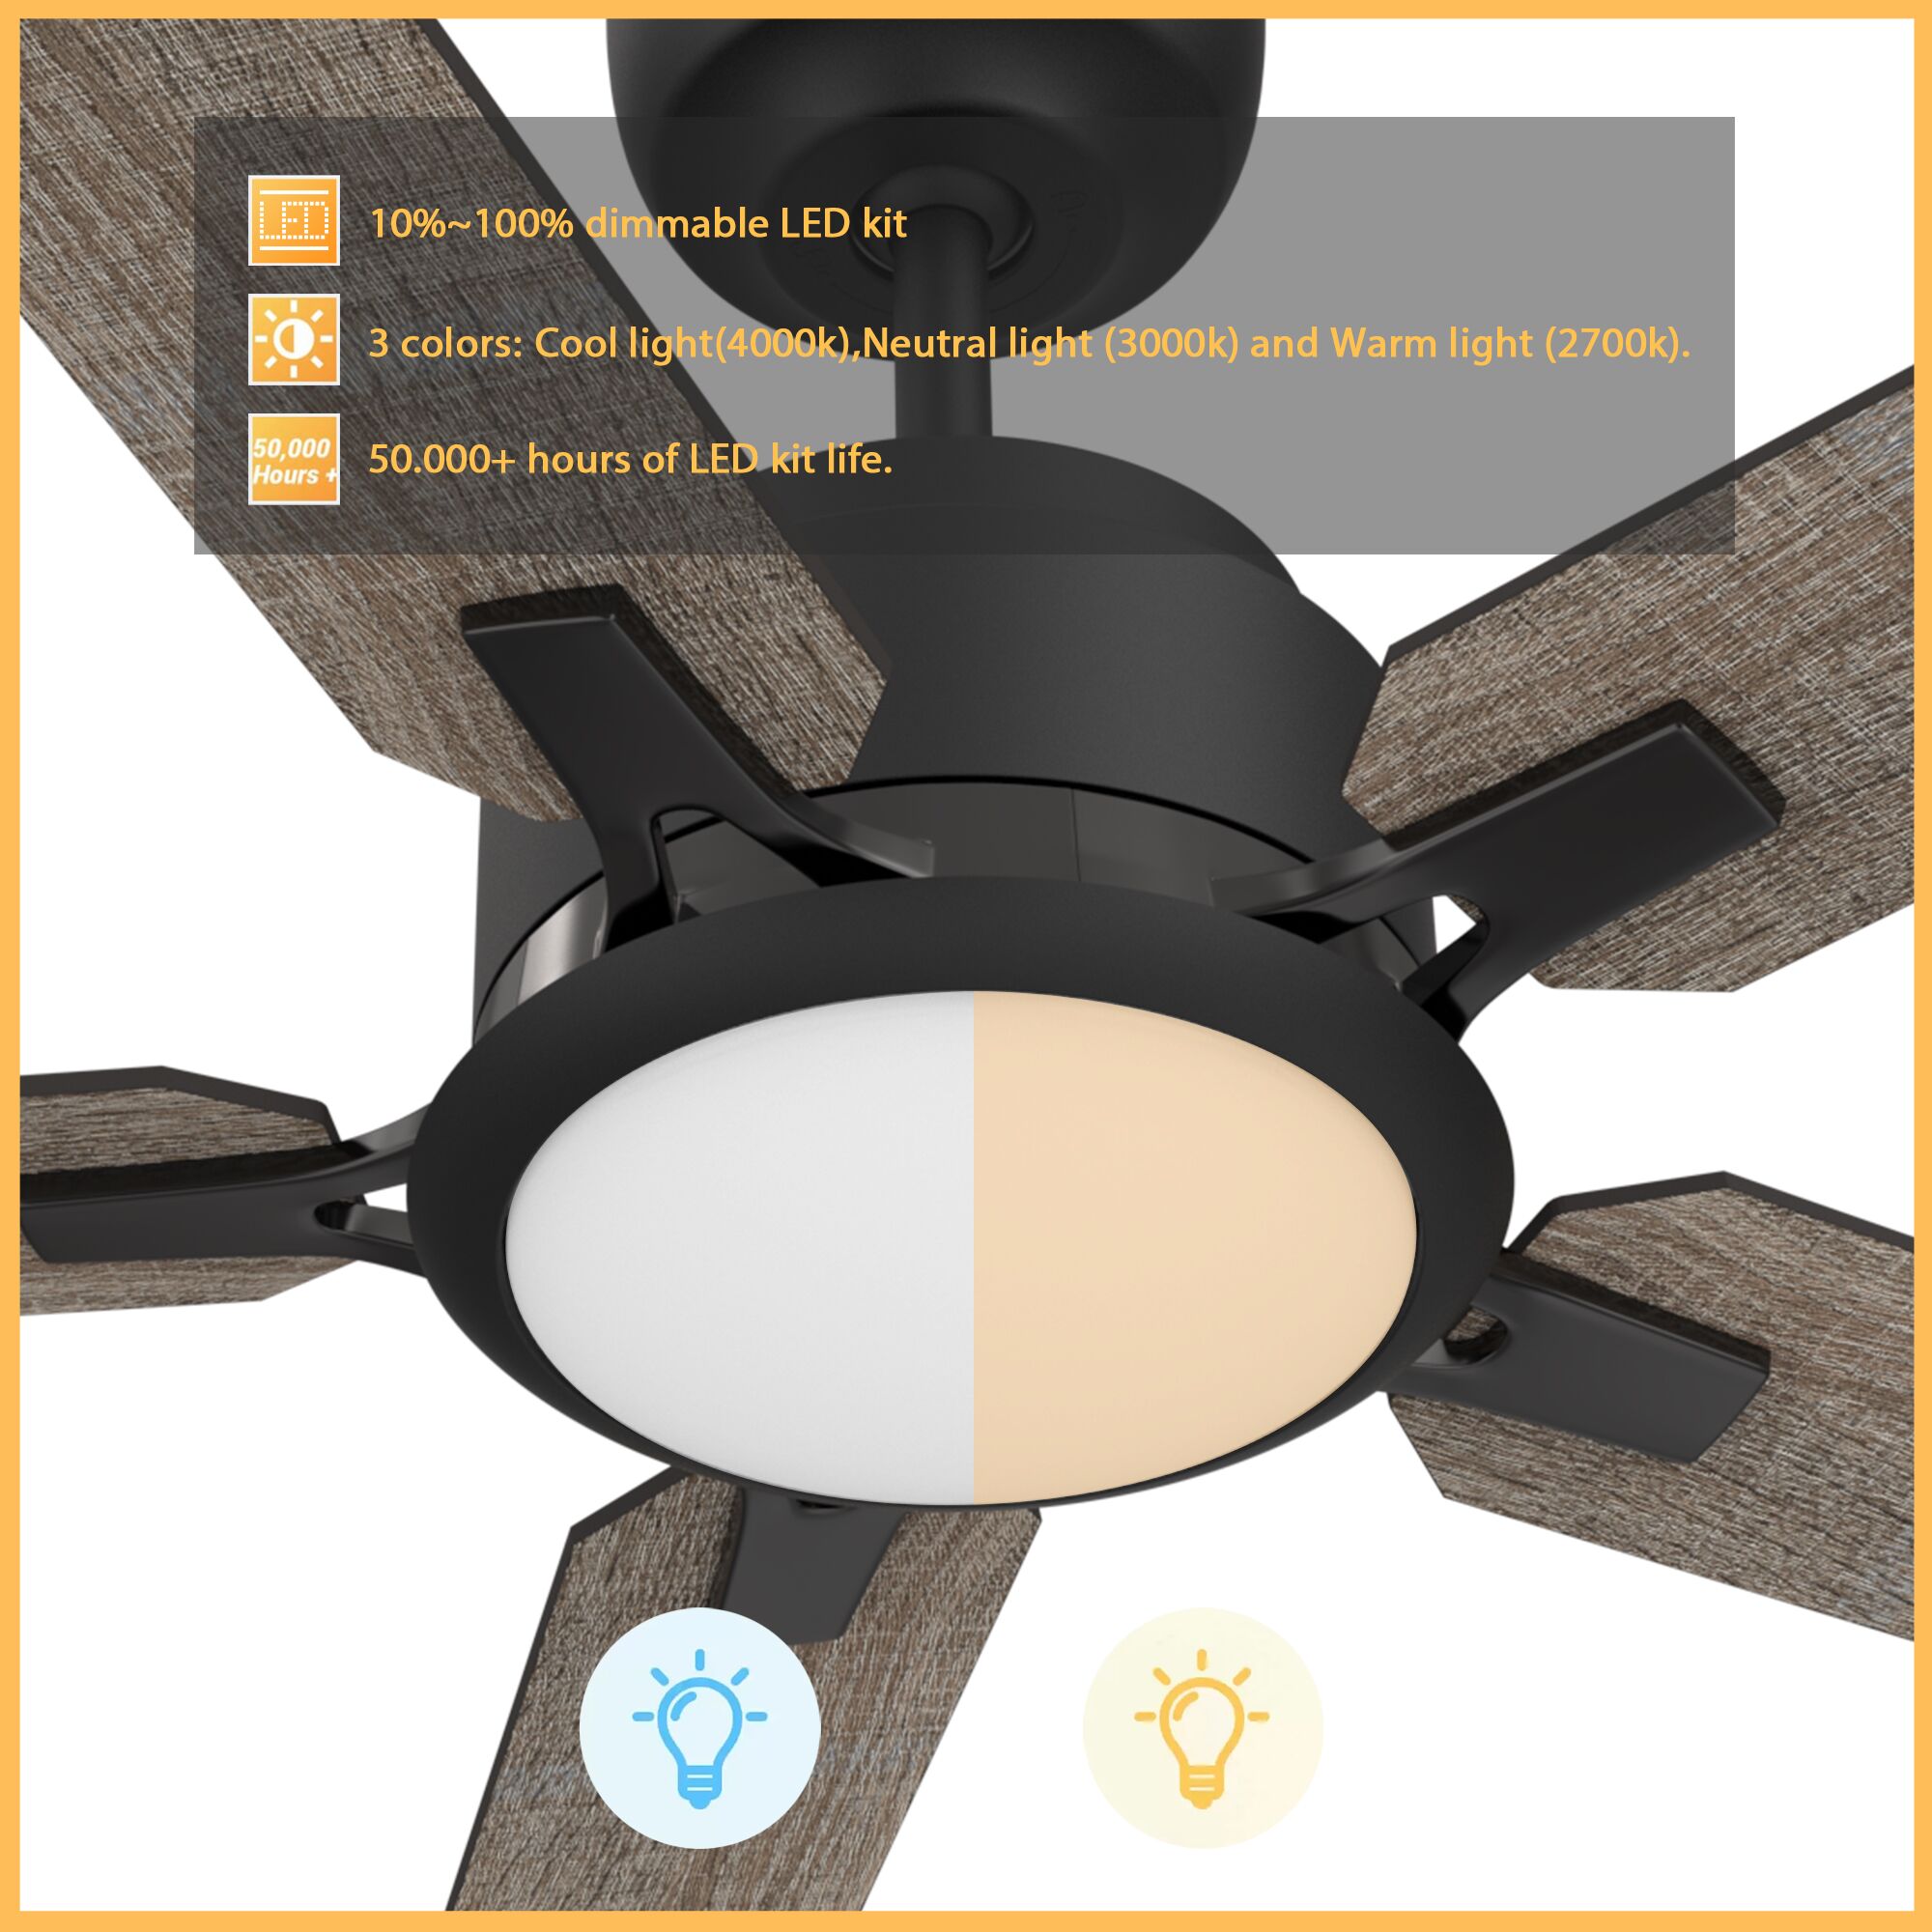 This Essex 60&#39;&#39; smart ceiling fan keeps your space cool, bright, and stylish. It is a soft modern masterpiece perfect for your large indoor living spaces. This Wifi smart ceiling fan is a simplicity designing with Black finish, use elegant Plywood blades and has an integrated 4000K LED cool light. The fan features Remote control, Wi-Fi apps, Siri Shortcut and Voice control technology (compatible with Amazon Alexa and Google Home Assistant ) to set fan preferences.